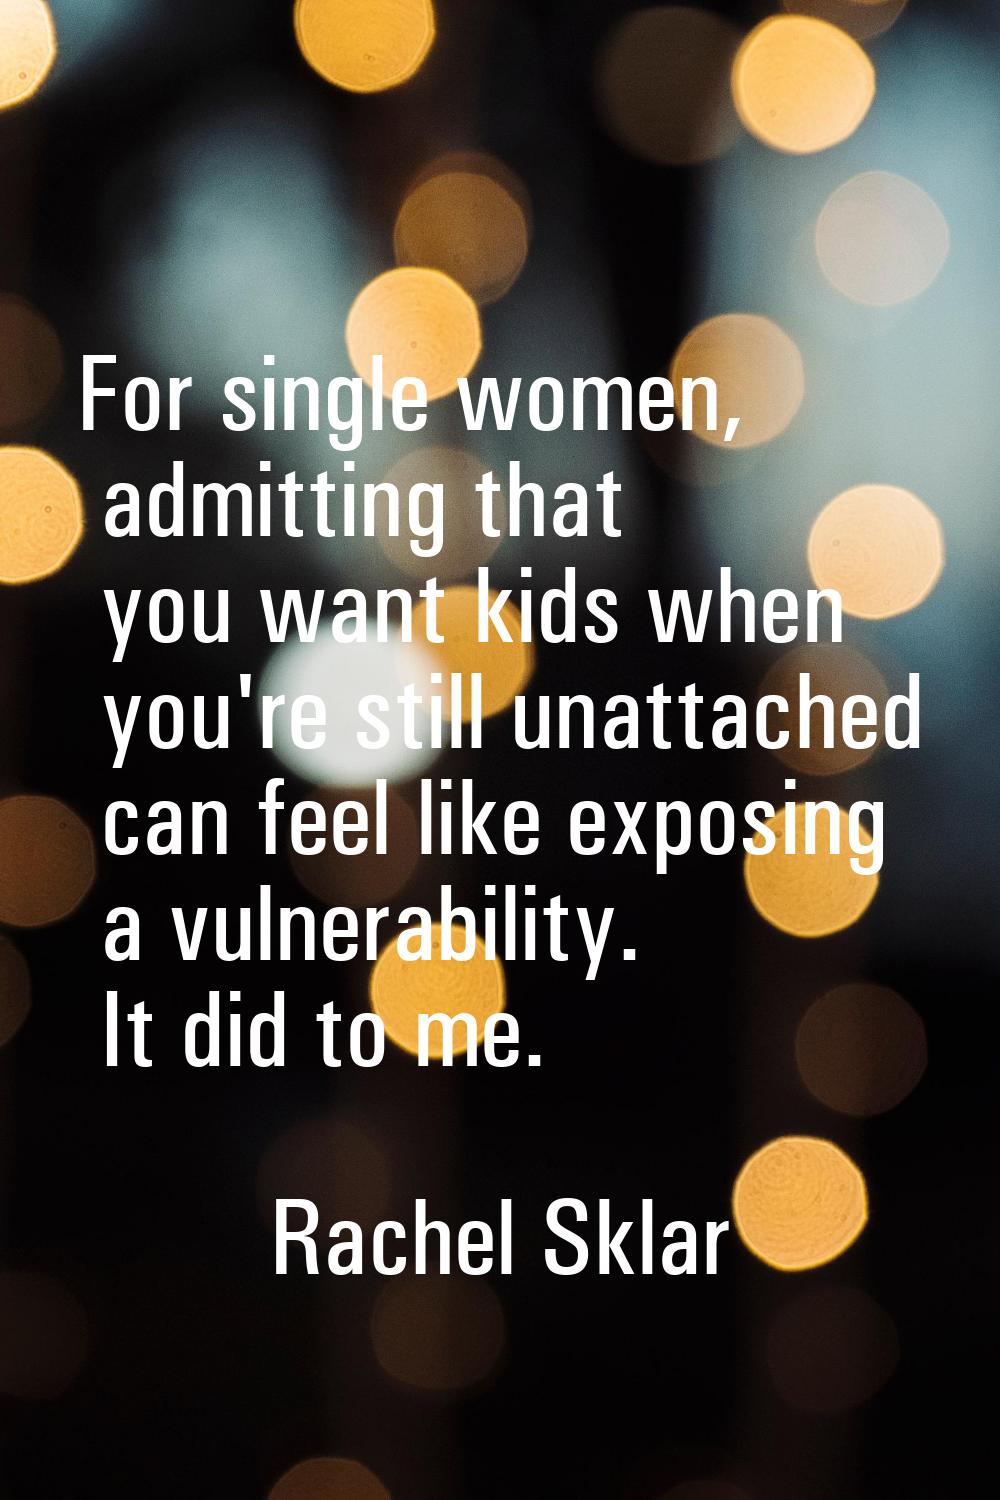 For single women, admitting that you want kids when you're still unattached can feel like exposing 